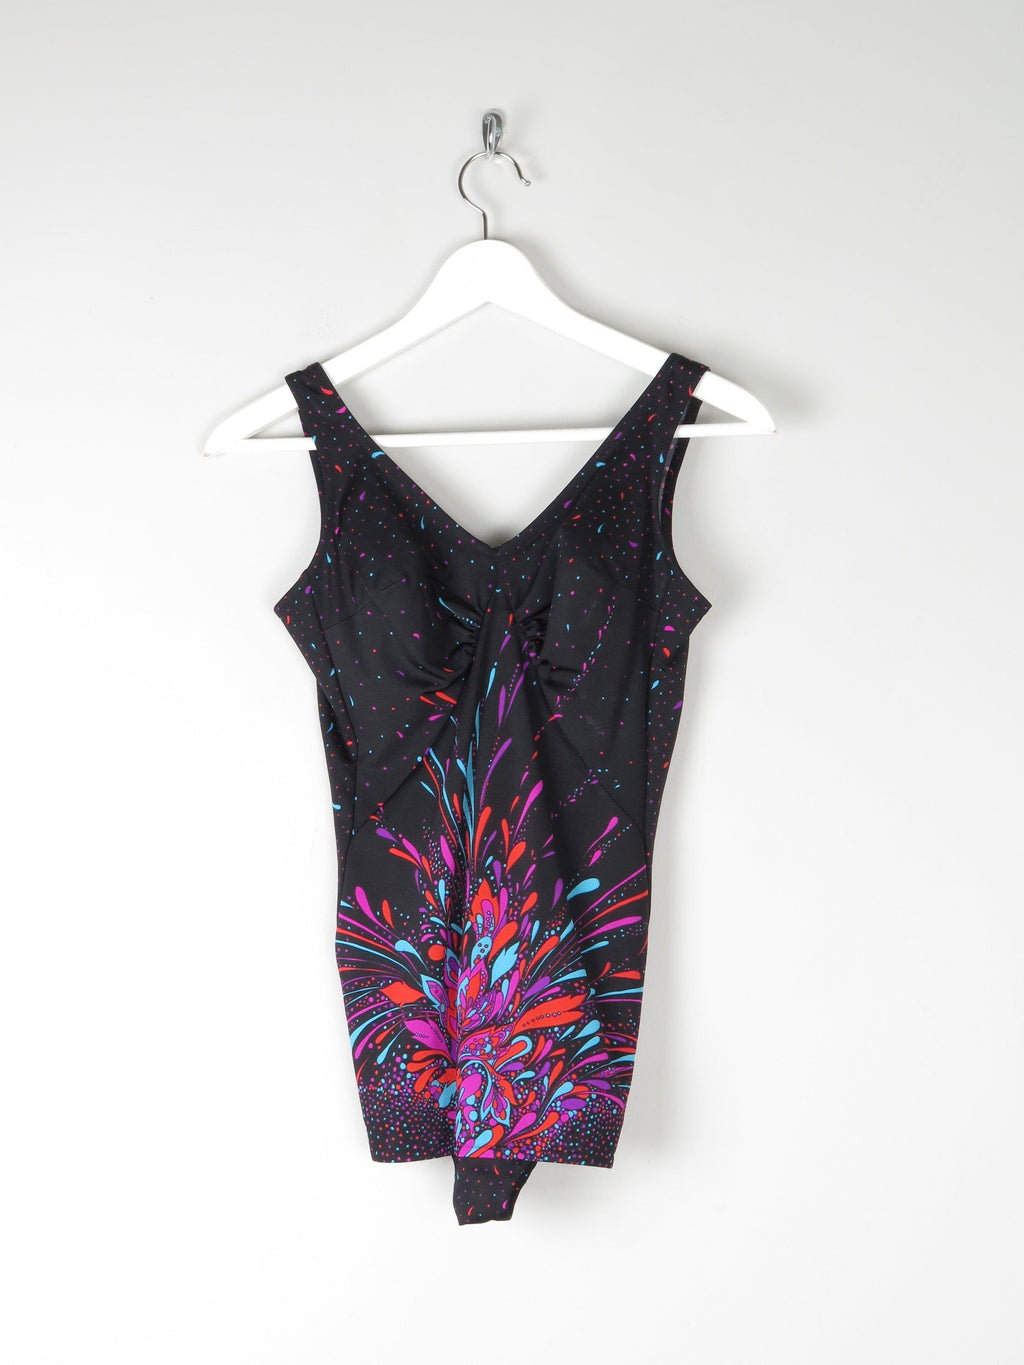 Vintage Black & Printed Swimsuit S/M B Cup (Padded) - The Harlequin